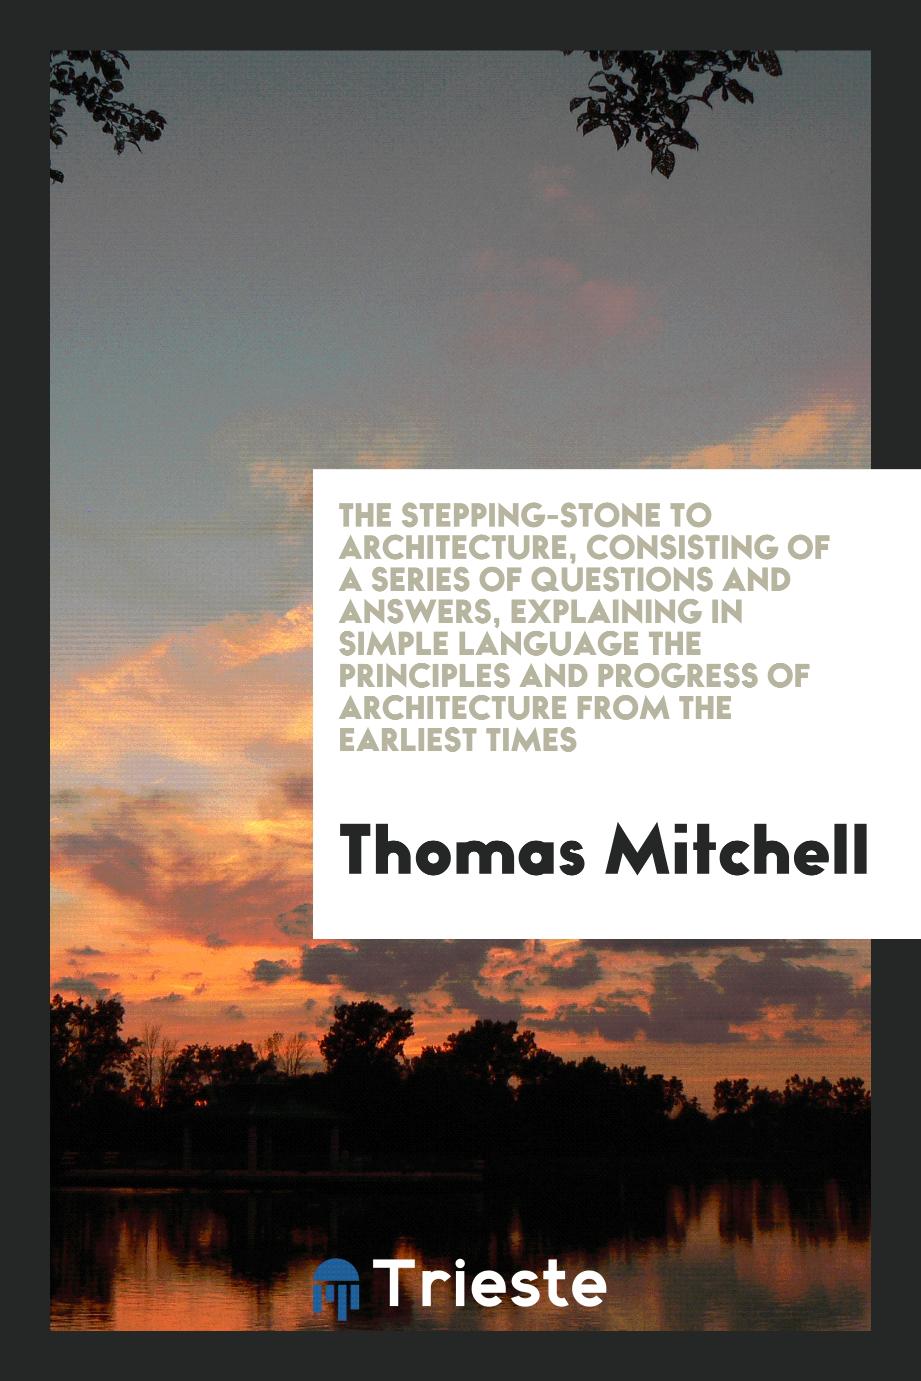 The Stepping-Stone to Architecture, Consisting of a Series of Questions and Answers, Explaining in Simple Language the Principles and Progress of Architecture from the Earliest Times